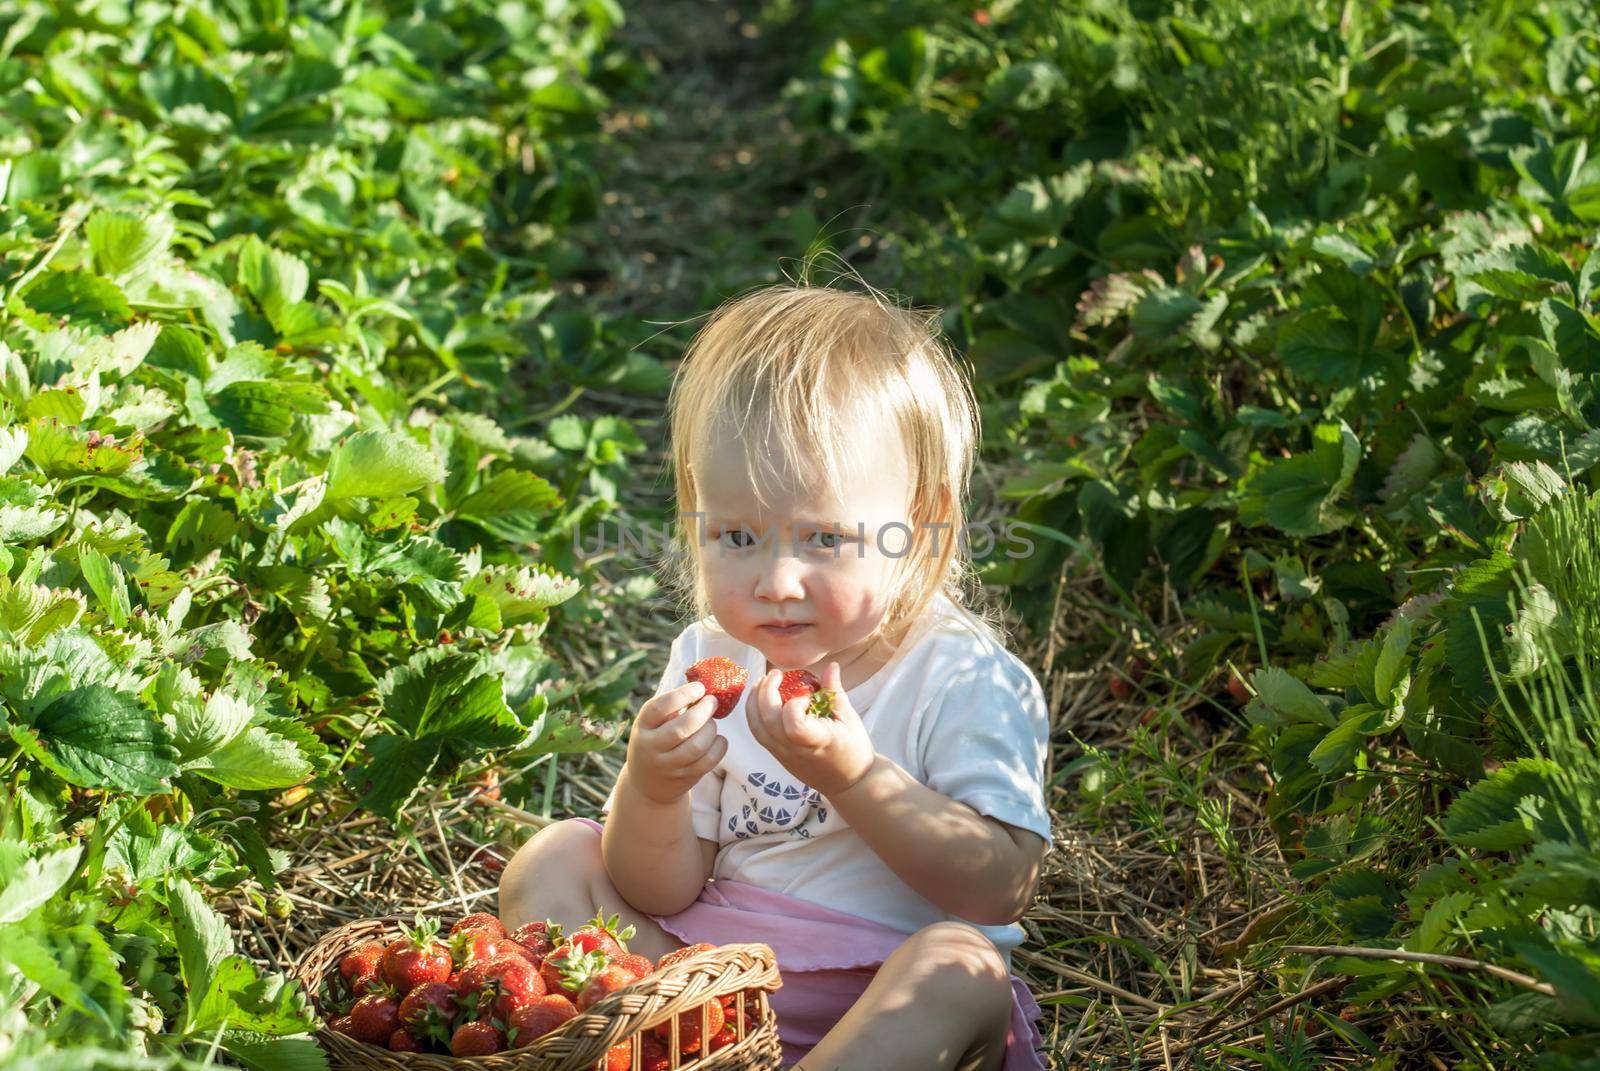 baby on eating strawberrry on field with basket of fresh picked fruits